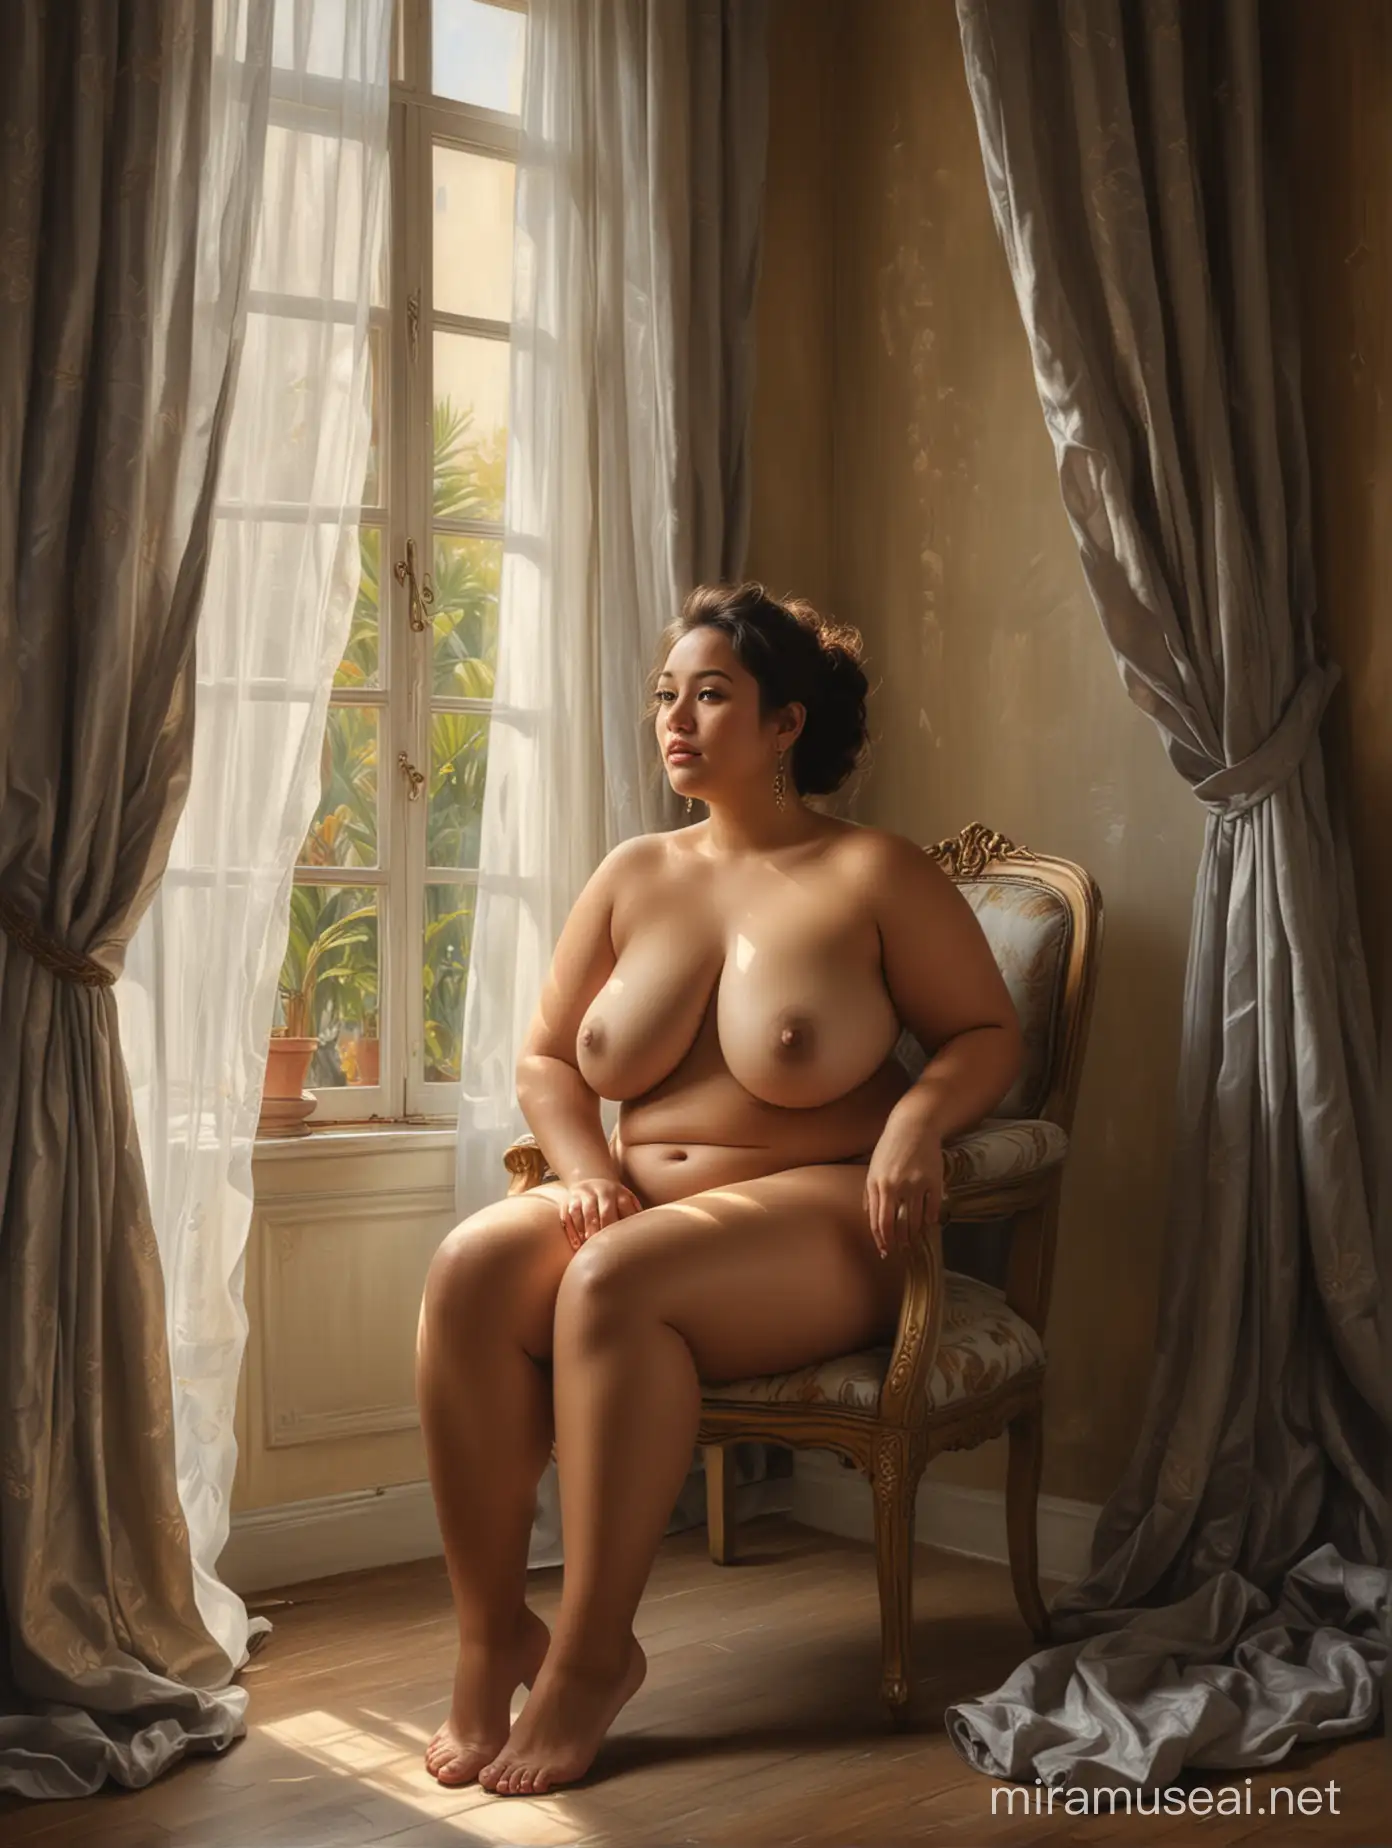 Plus Sized Indonesian Woman Sitting by Window in Elisabeth Vigee Le Brun Style Oil Painting